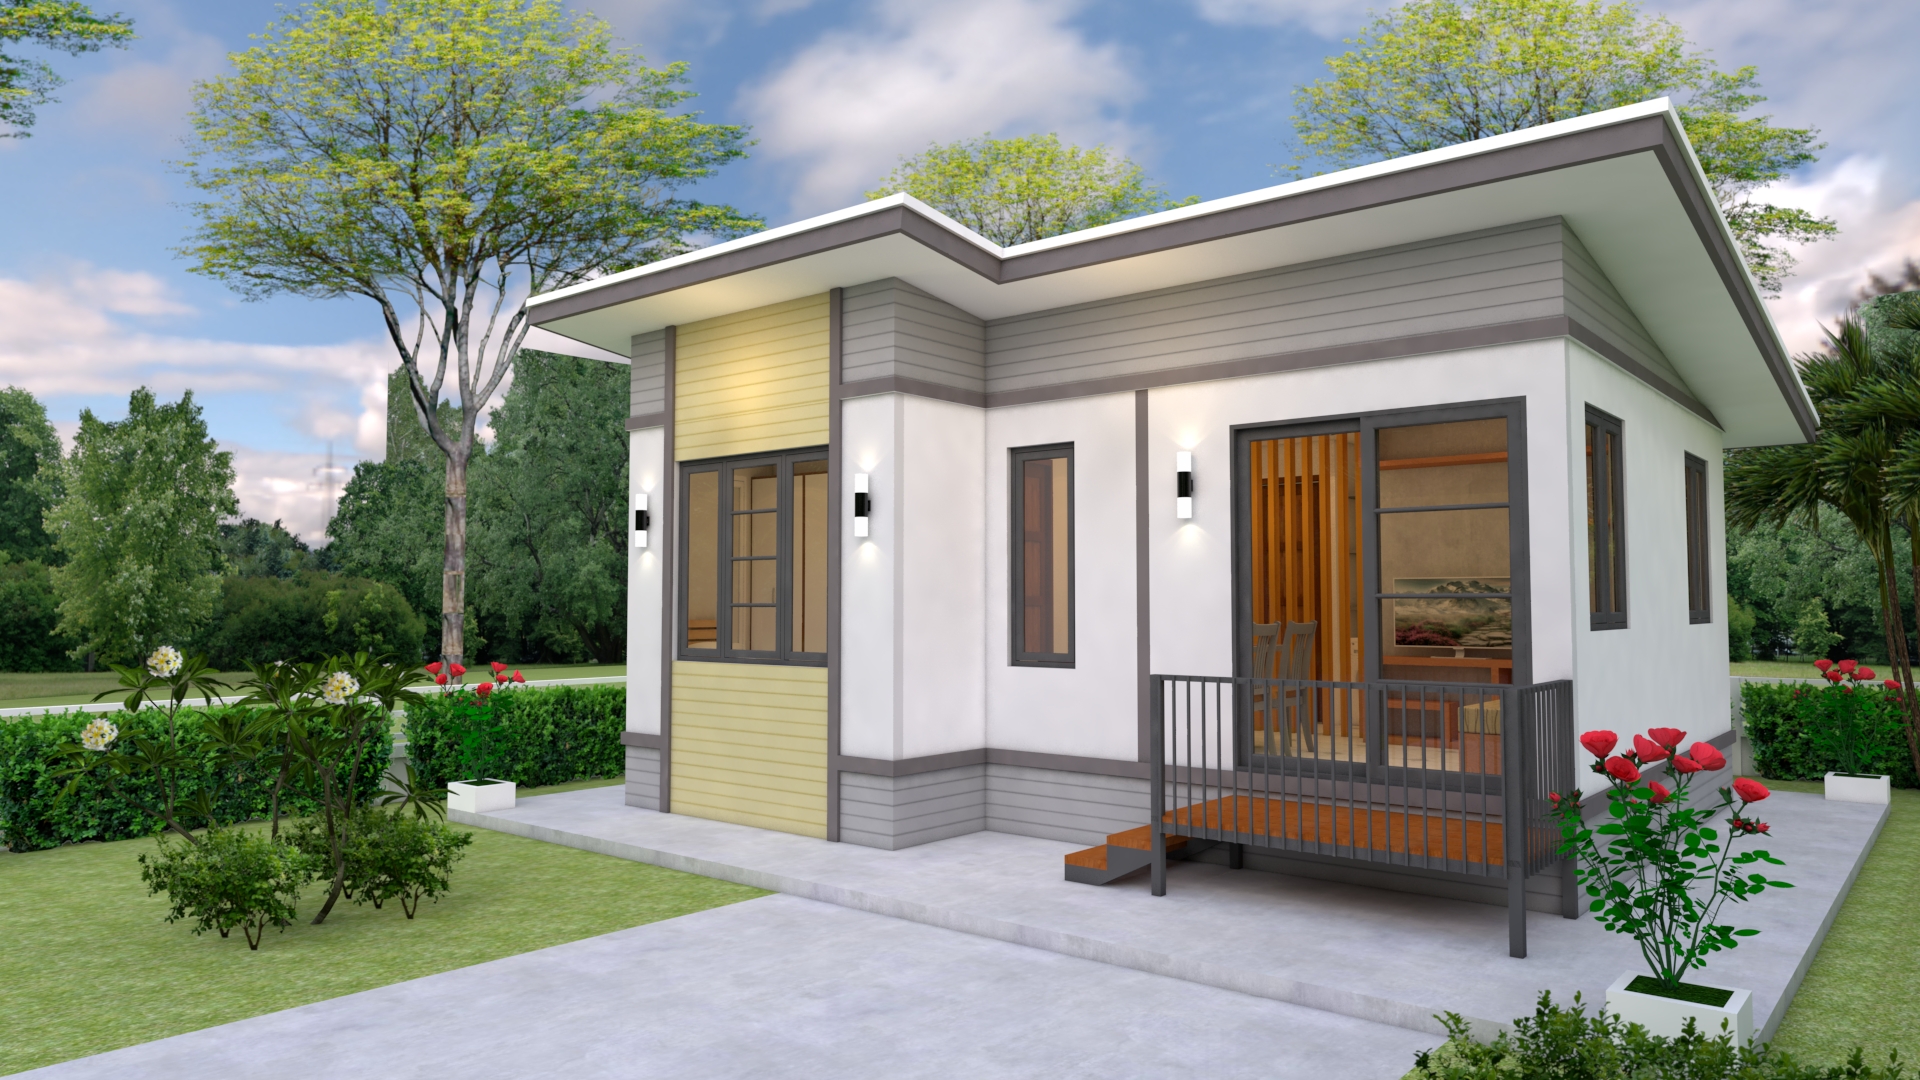 Simple Small House Design 7x6 Meter 23x20 Feet - Pro Home Decor Z